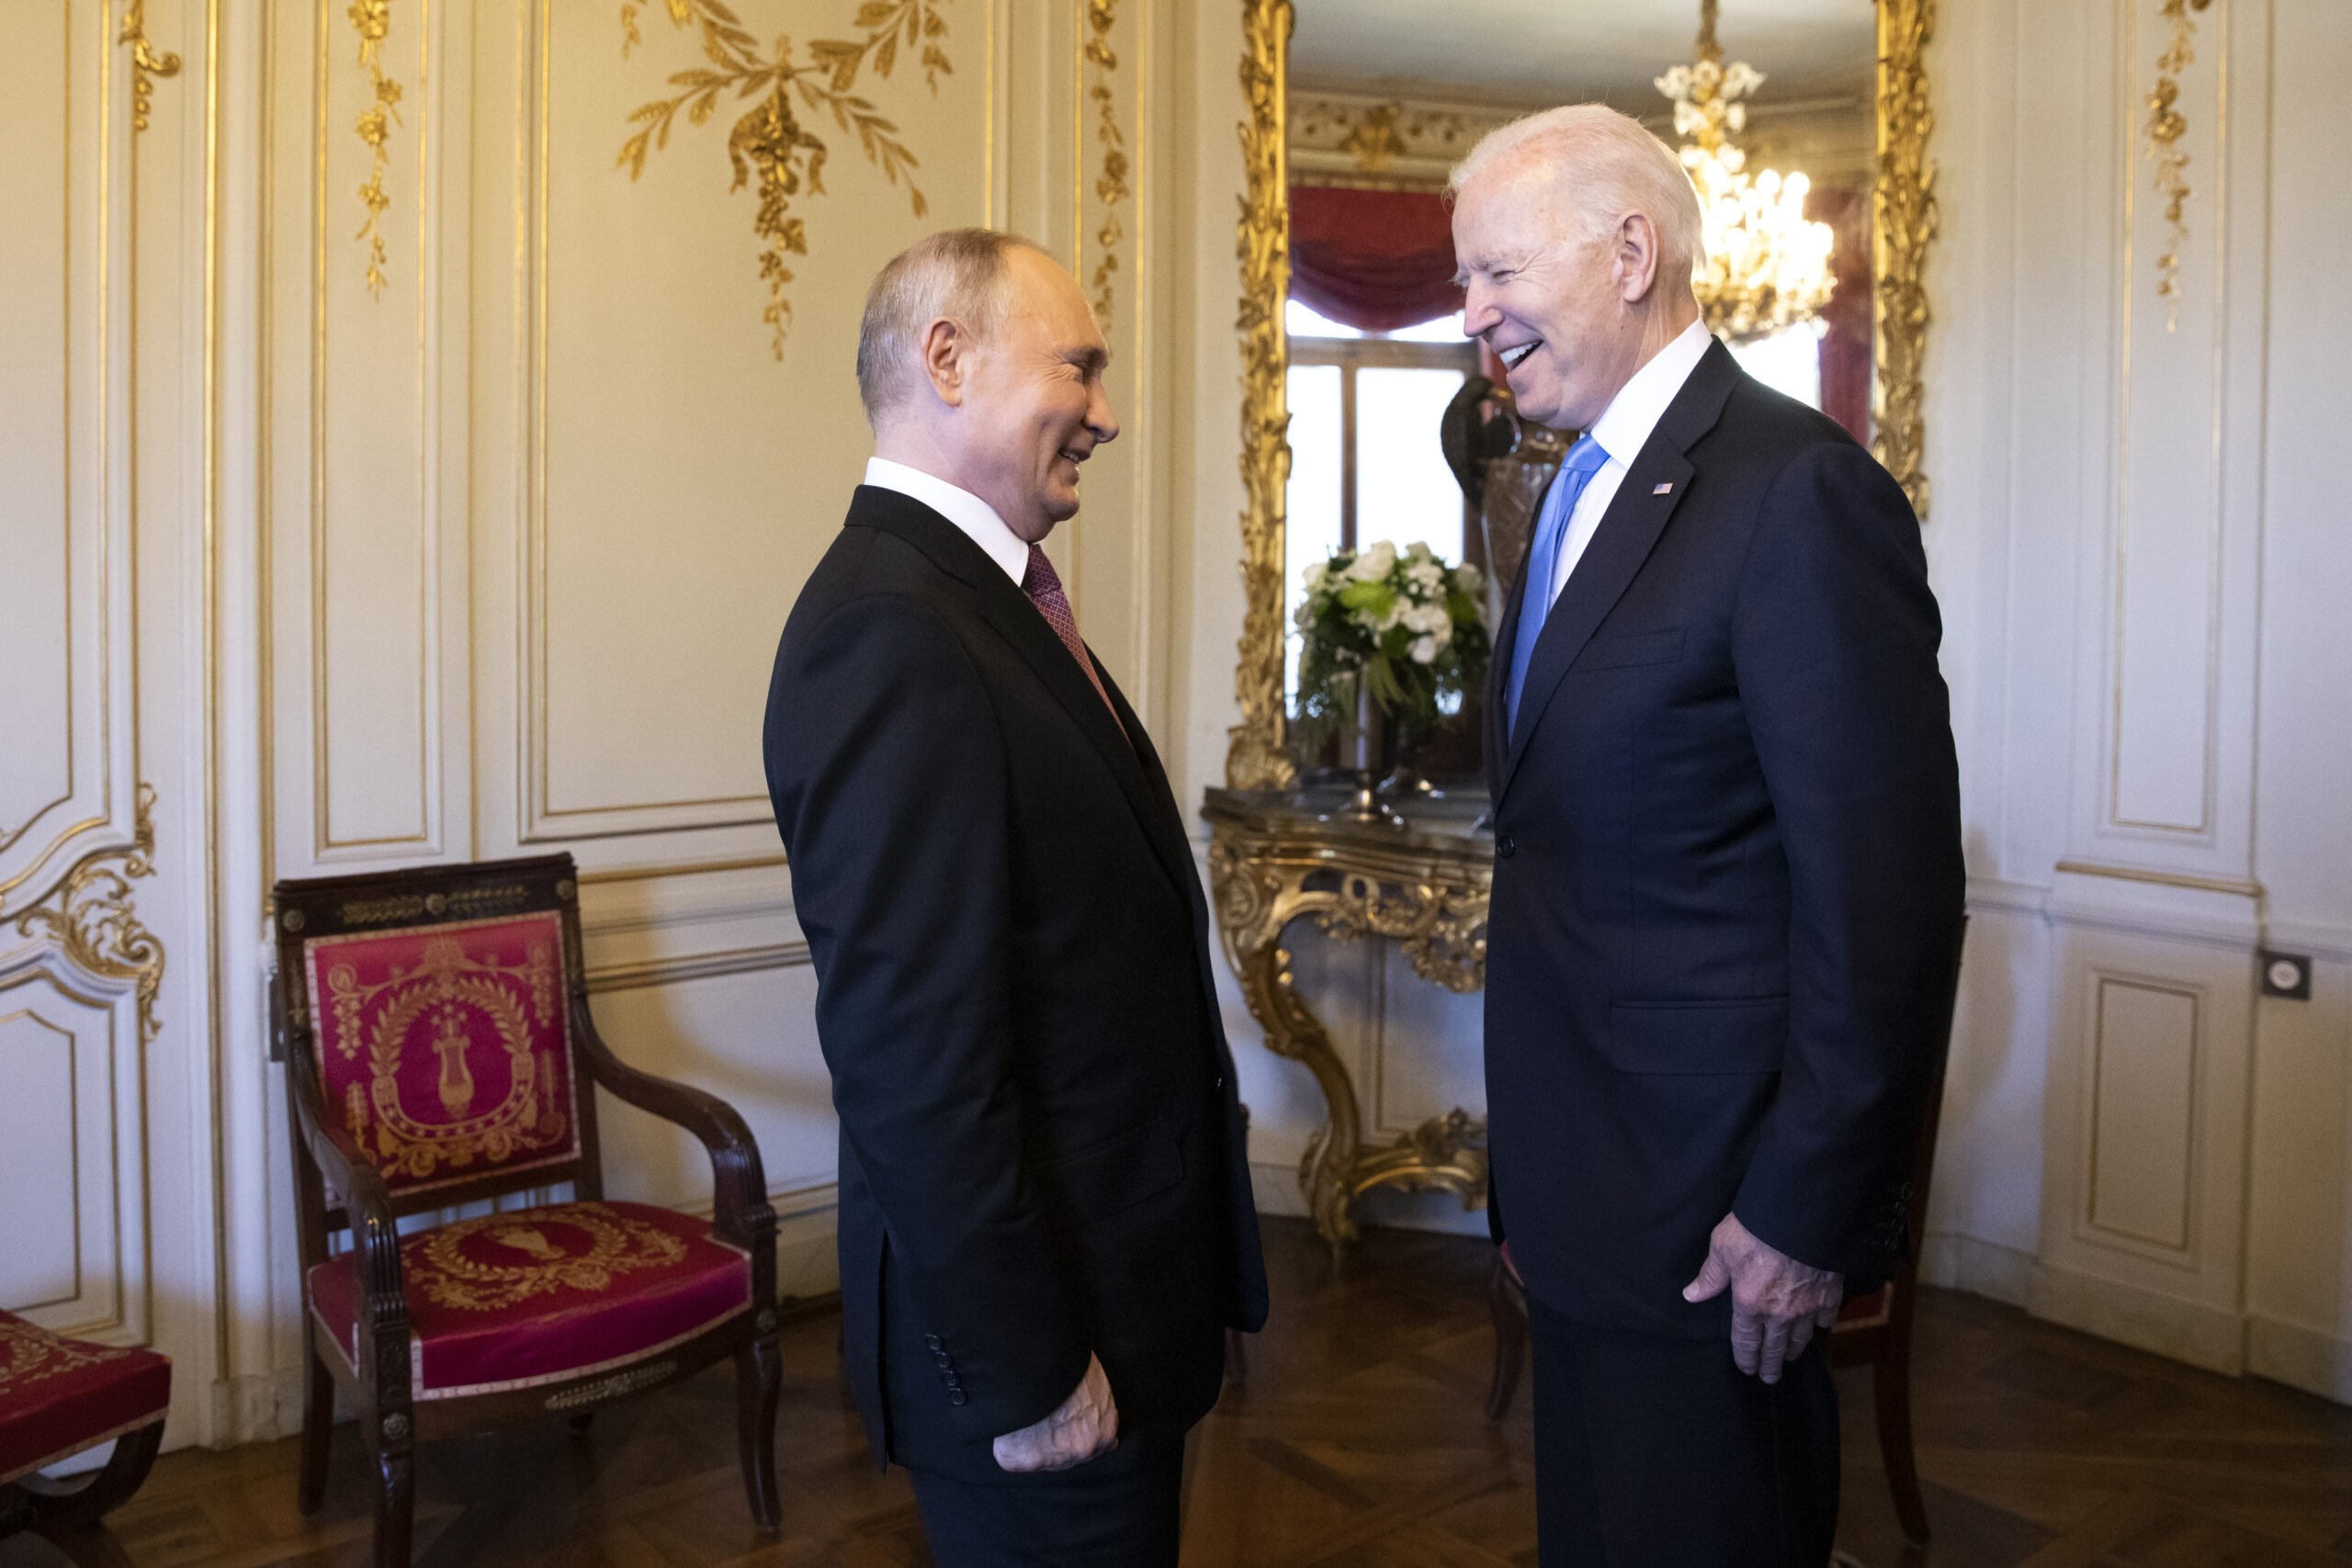 Psaki Says Biden Agreed to Meeting With Putin, ‘Provided Russia Does Not Proceed With Military Action’ in Ukraine